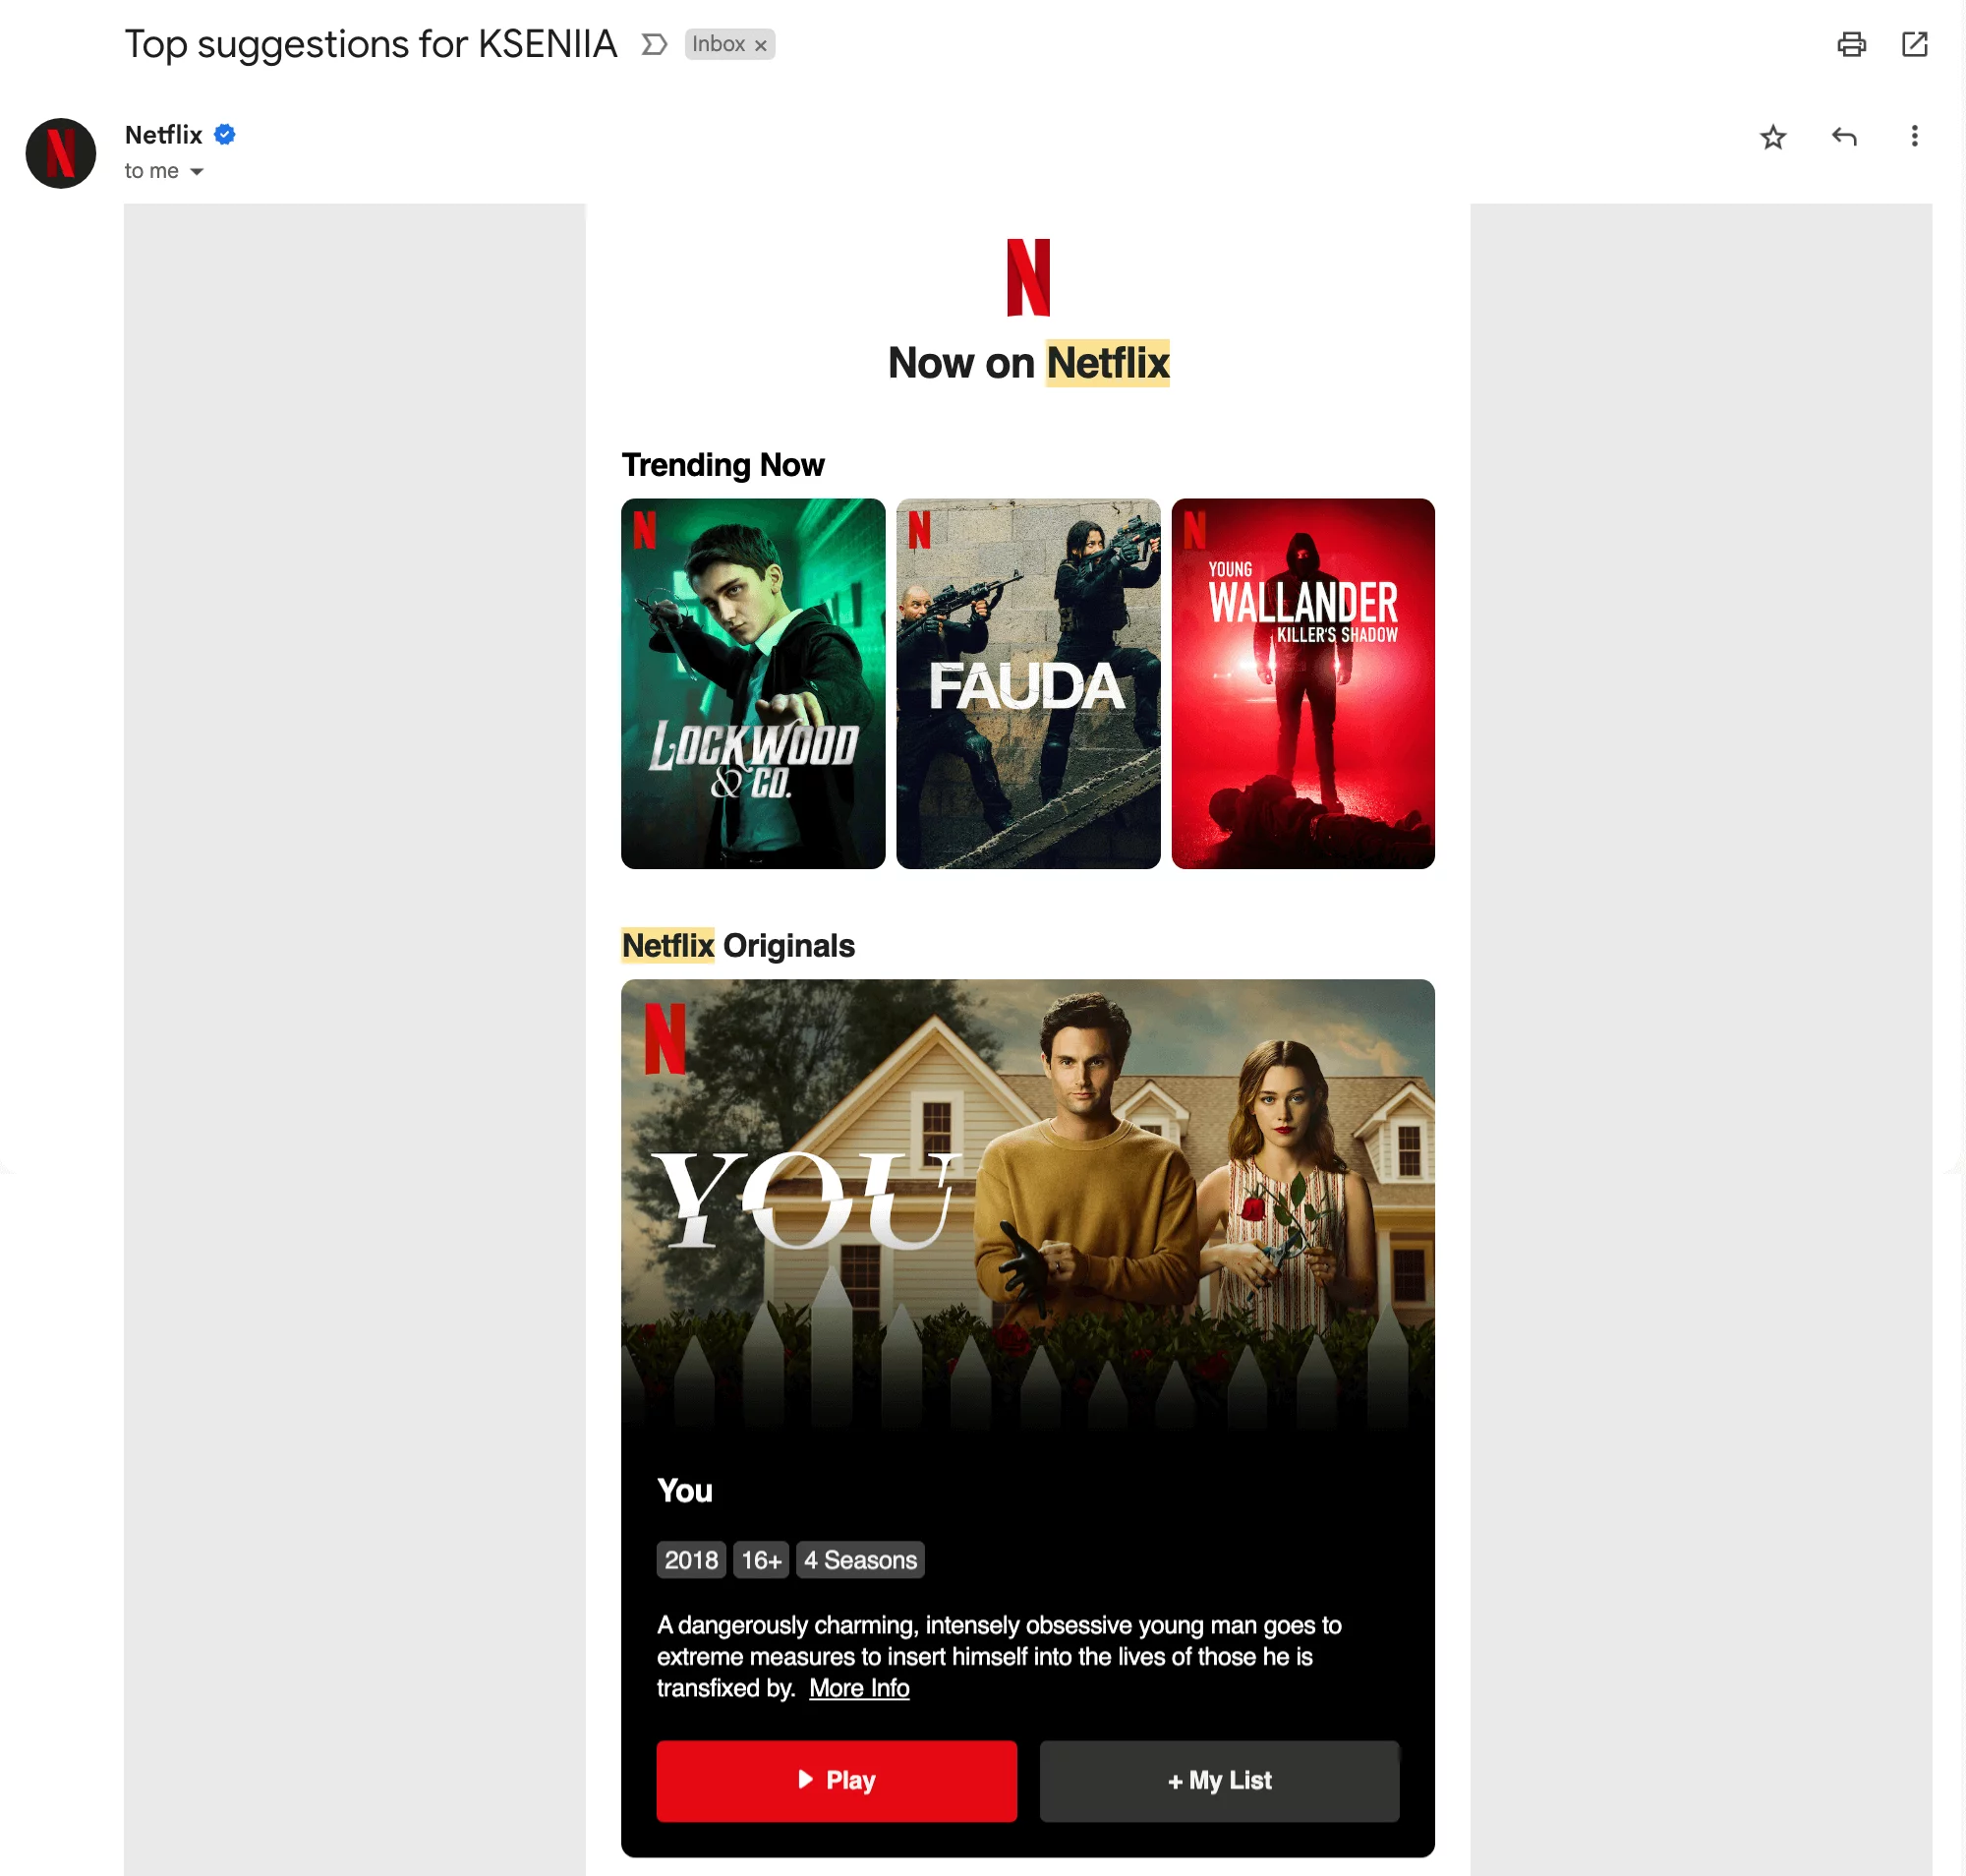 Personalized email from Netflix to Kseniia showing movie recommendations.